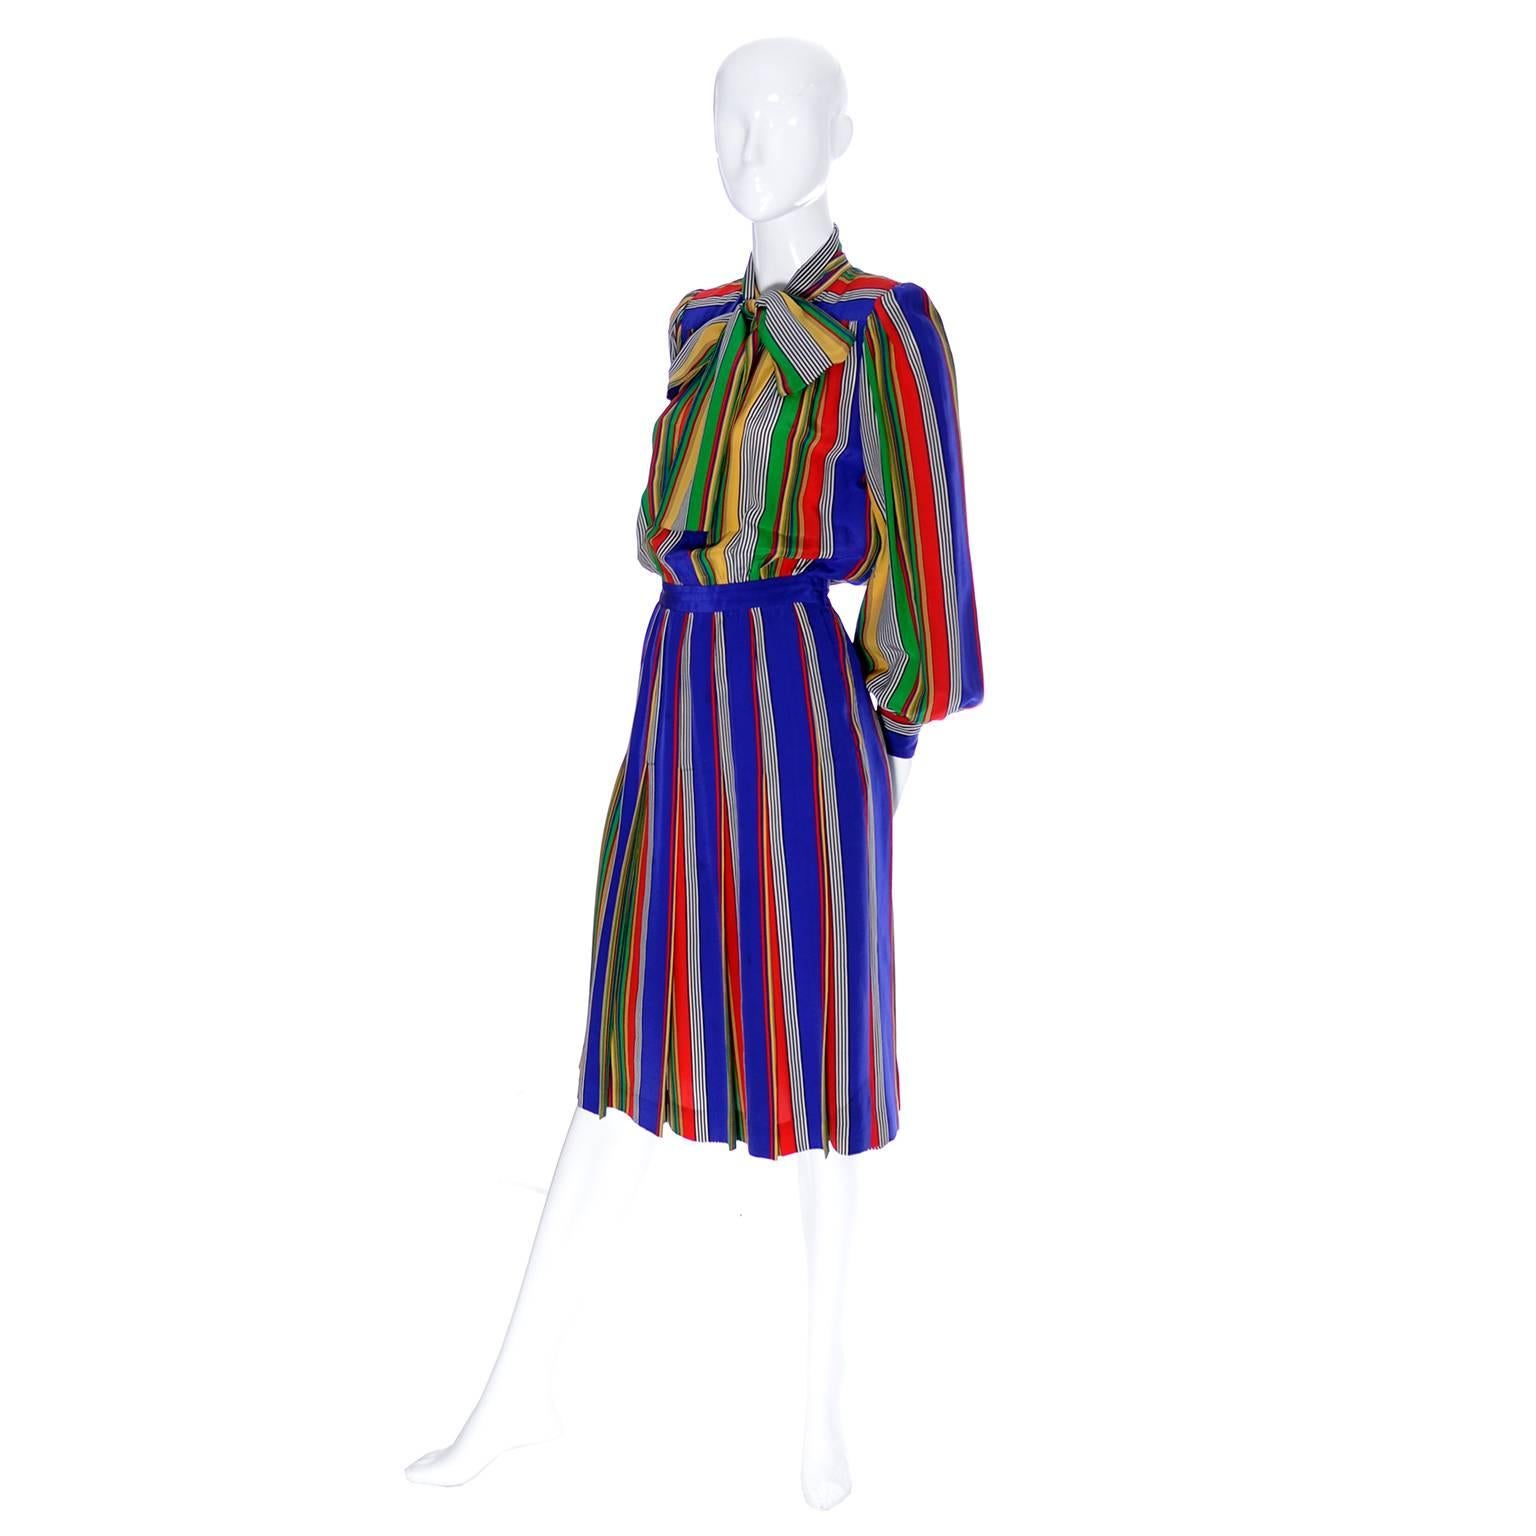 This beautiful vintage dress is from the Yves Saint Laurent Rive Gauche collection from the late 1970's. The dress is in a fabulous multi colored silk striped fabric and the top portion has a pretty sash or bow.  The dress looks like two pieces but